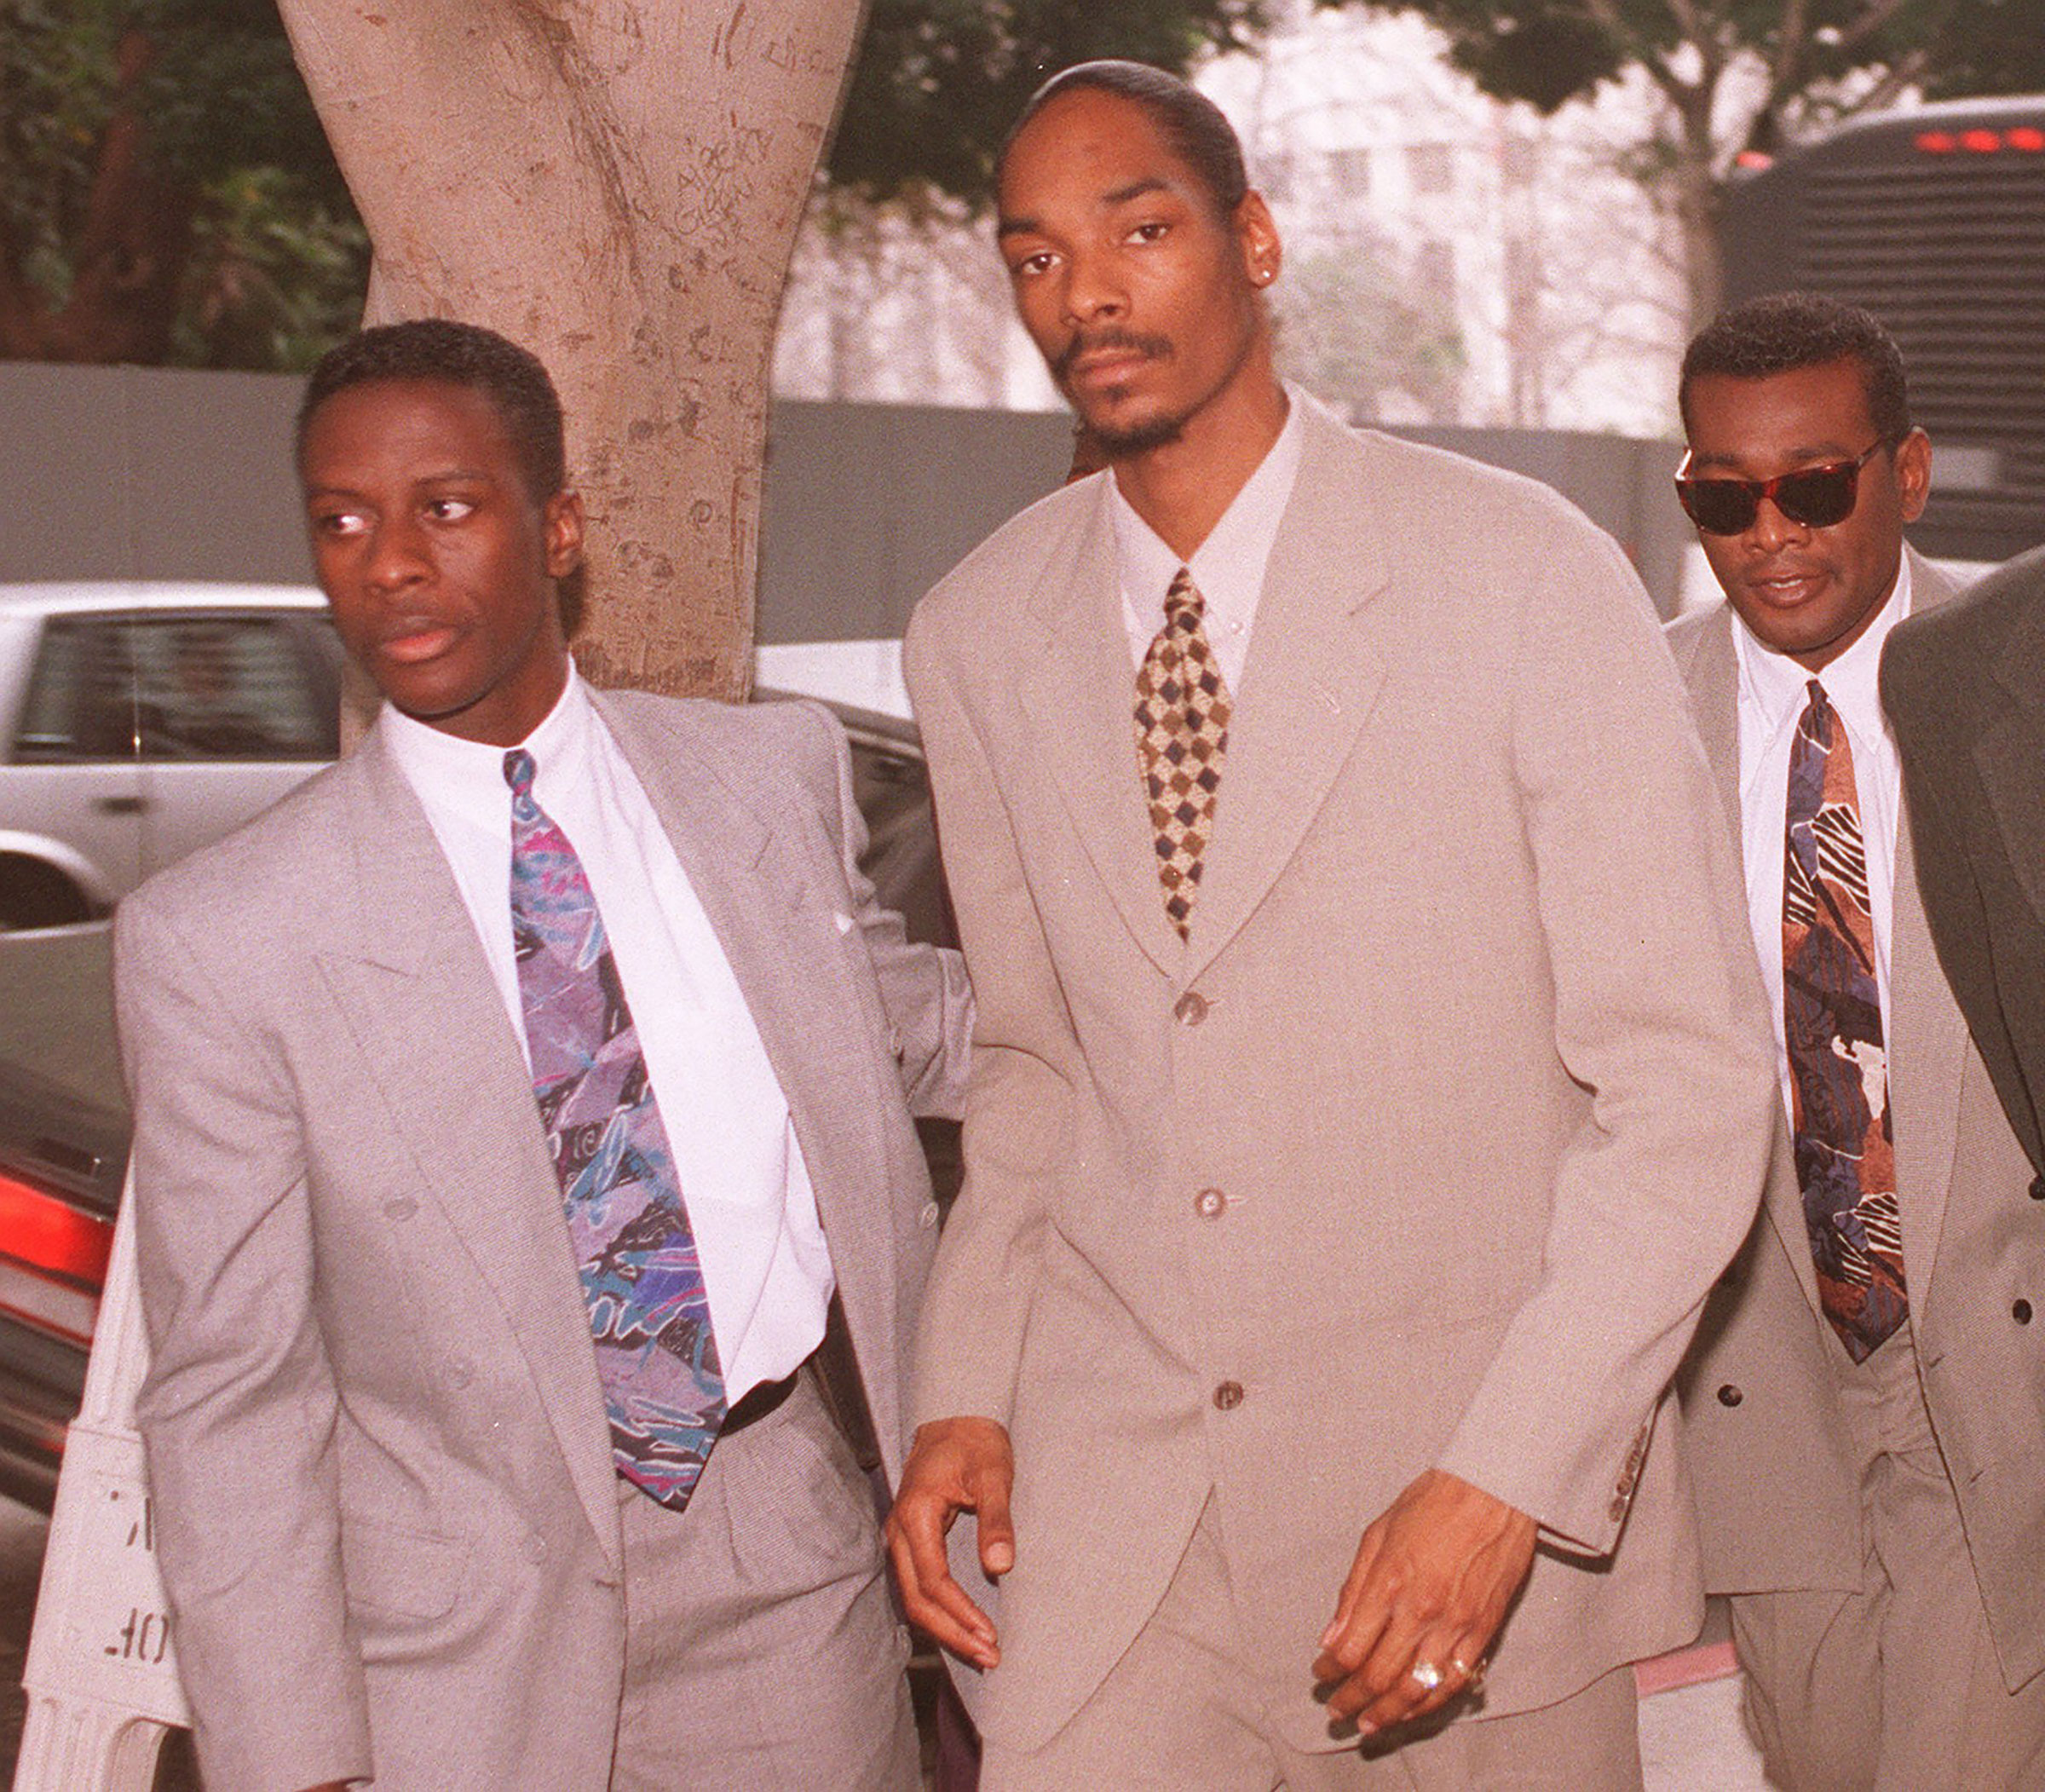 Snoop Dogg, center, is escorted into the Los Angeles Criminal Courts building where he and a former bodyguard were on trial for a 1993 murder, on Feb. 9, 1996. (Mark J. Terrill—AP)